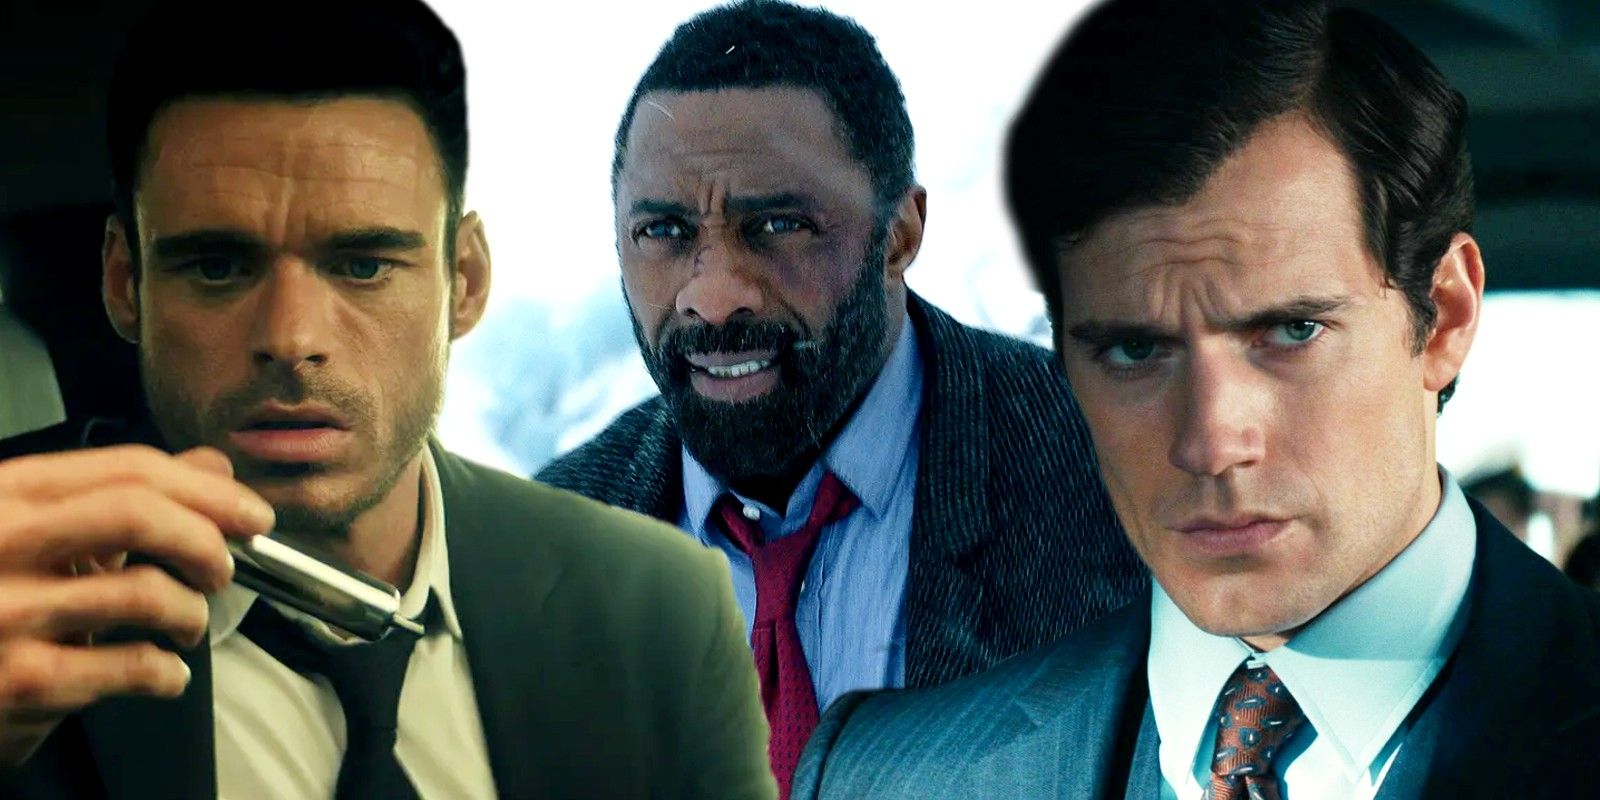 Blended image of Richard Madden in Citadel, Idris Elba in Luther and Henry Cavill in A Man From UNCLE